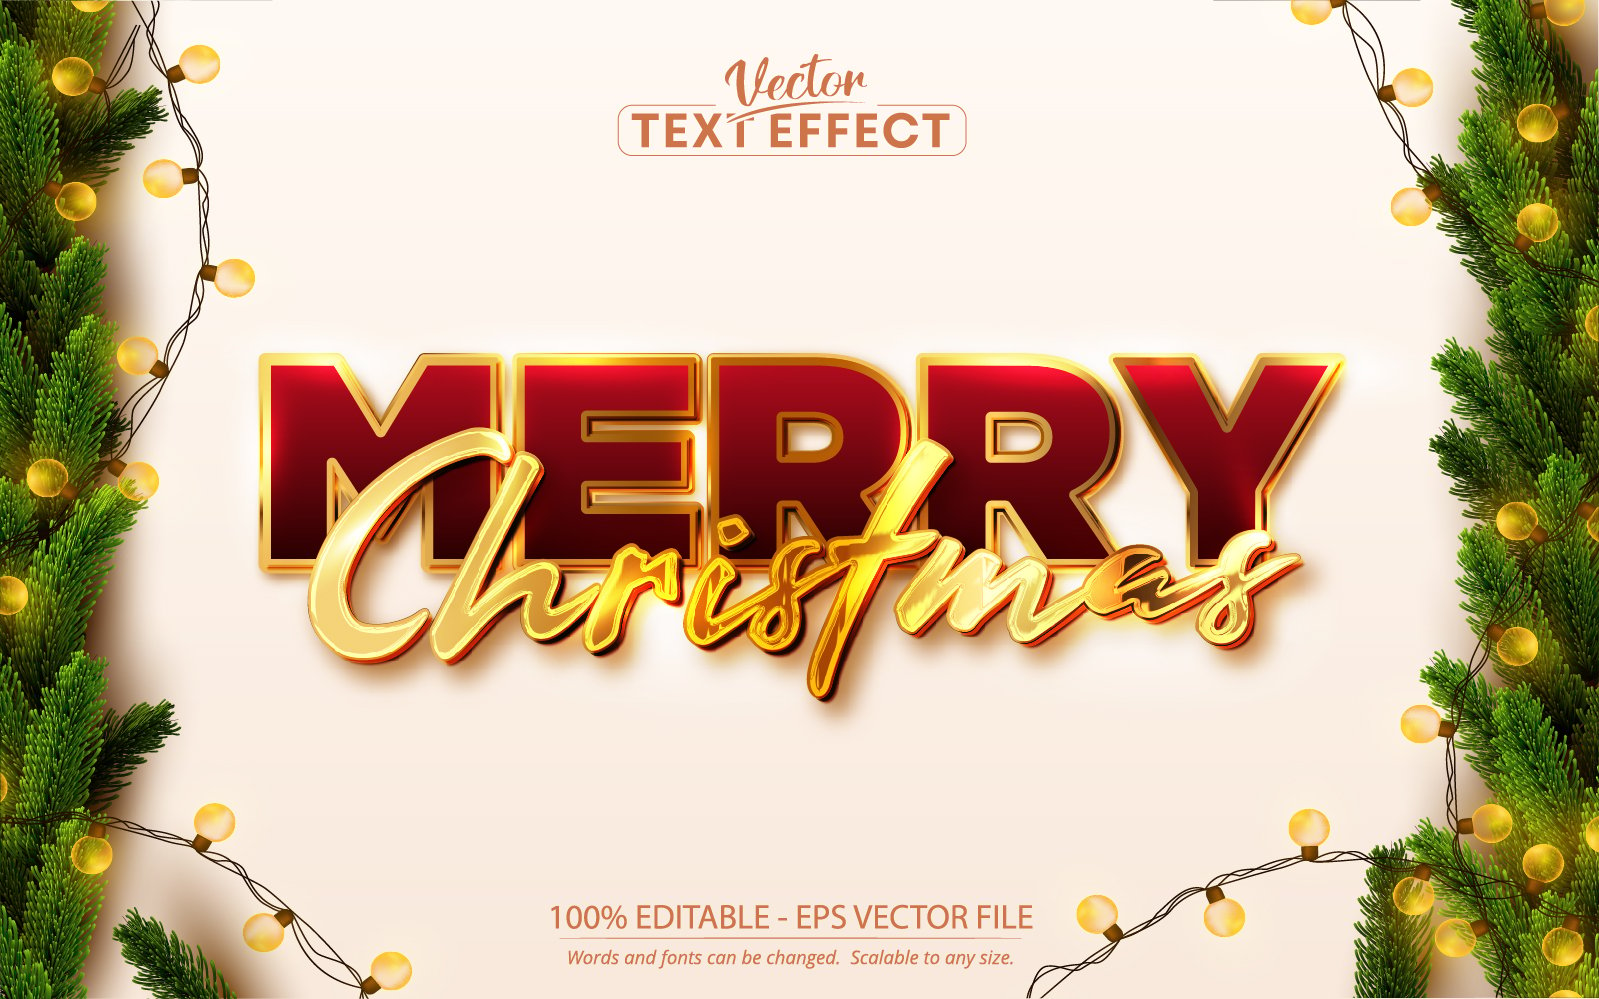 Merry Christmas - Editable Text Effect, Christmas Shiny Gold Text Style, Graphics Illustration